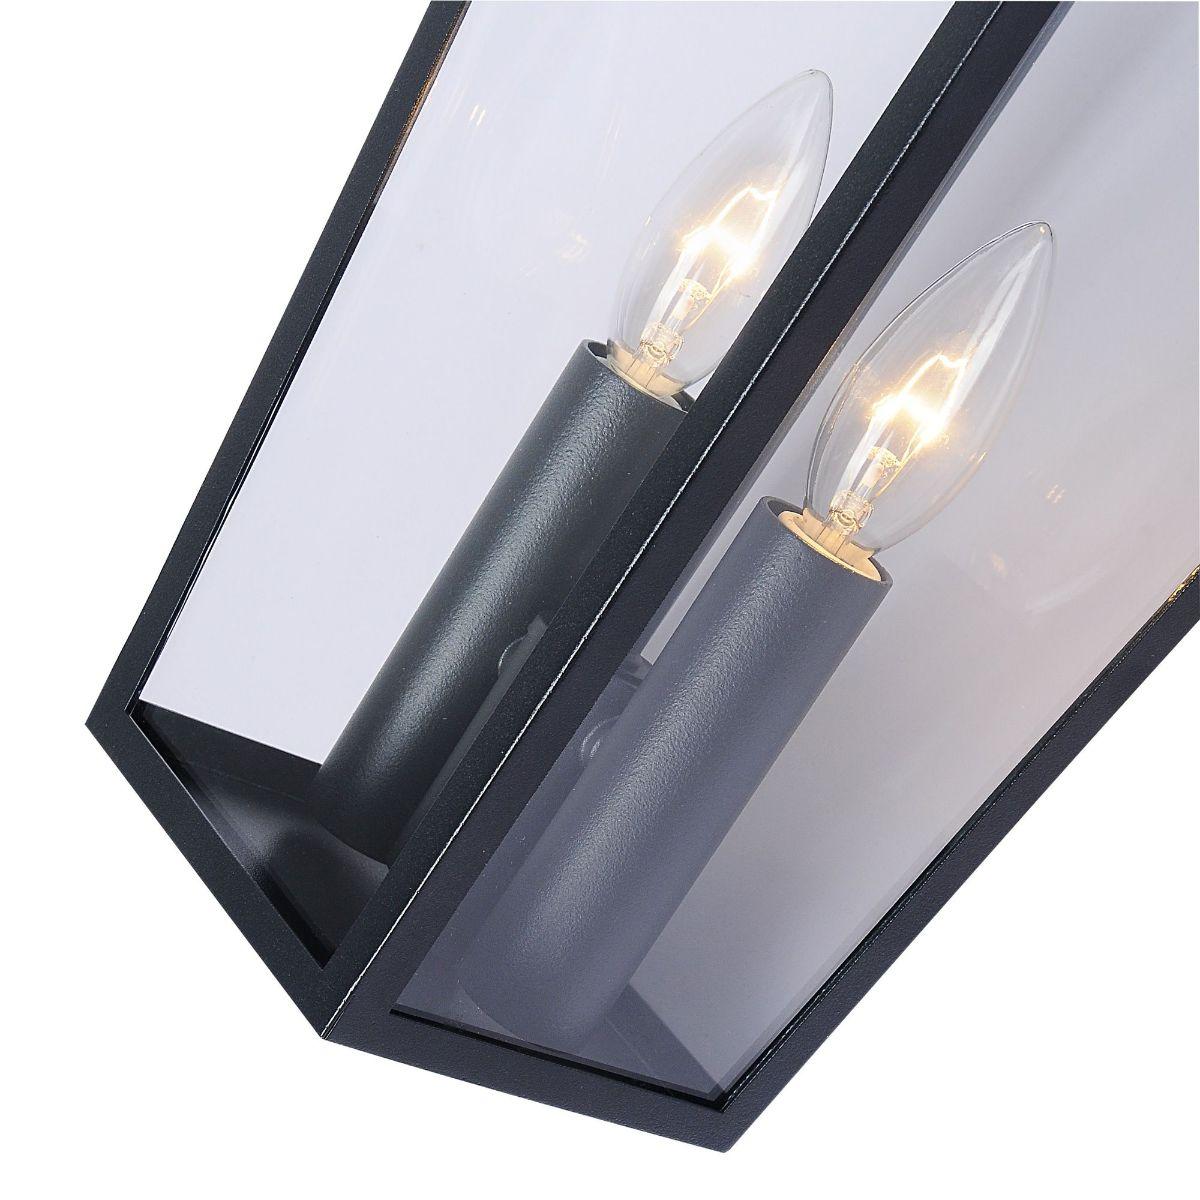 Winchester 16 In. 2 Lights Outdoor Wall Light Black Finish